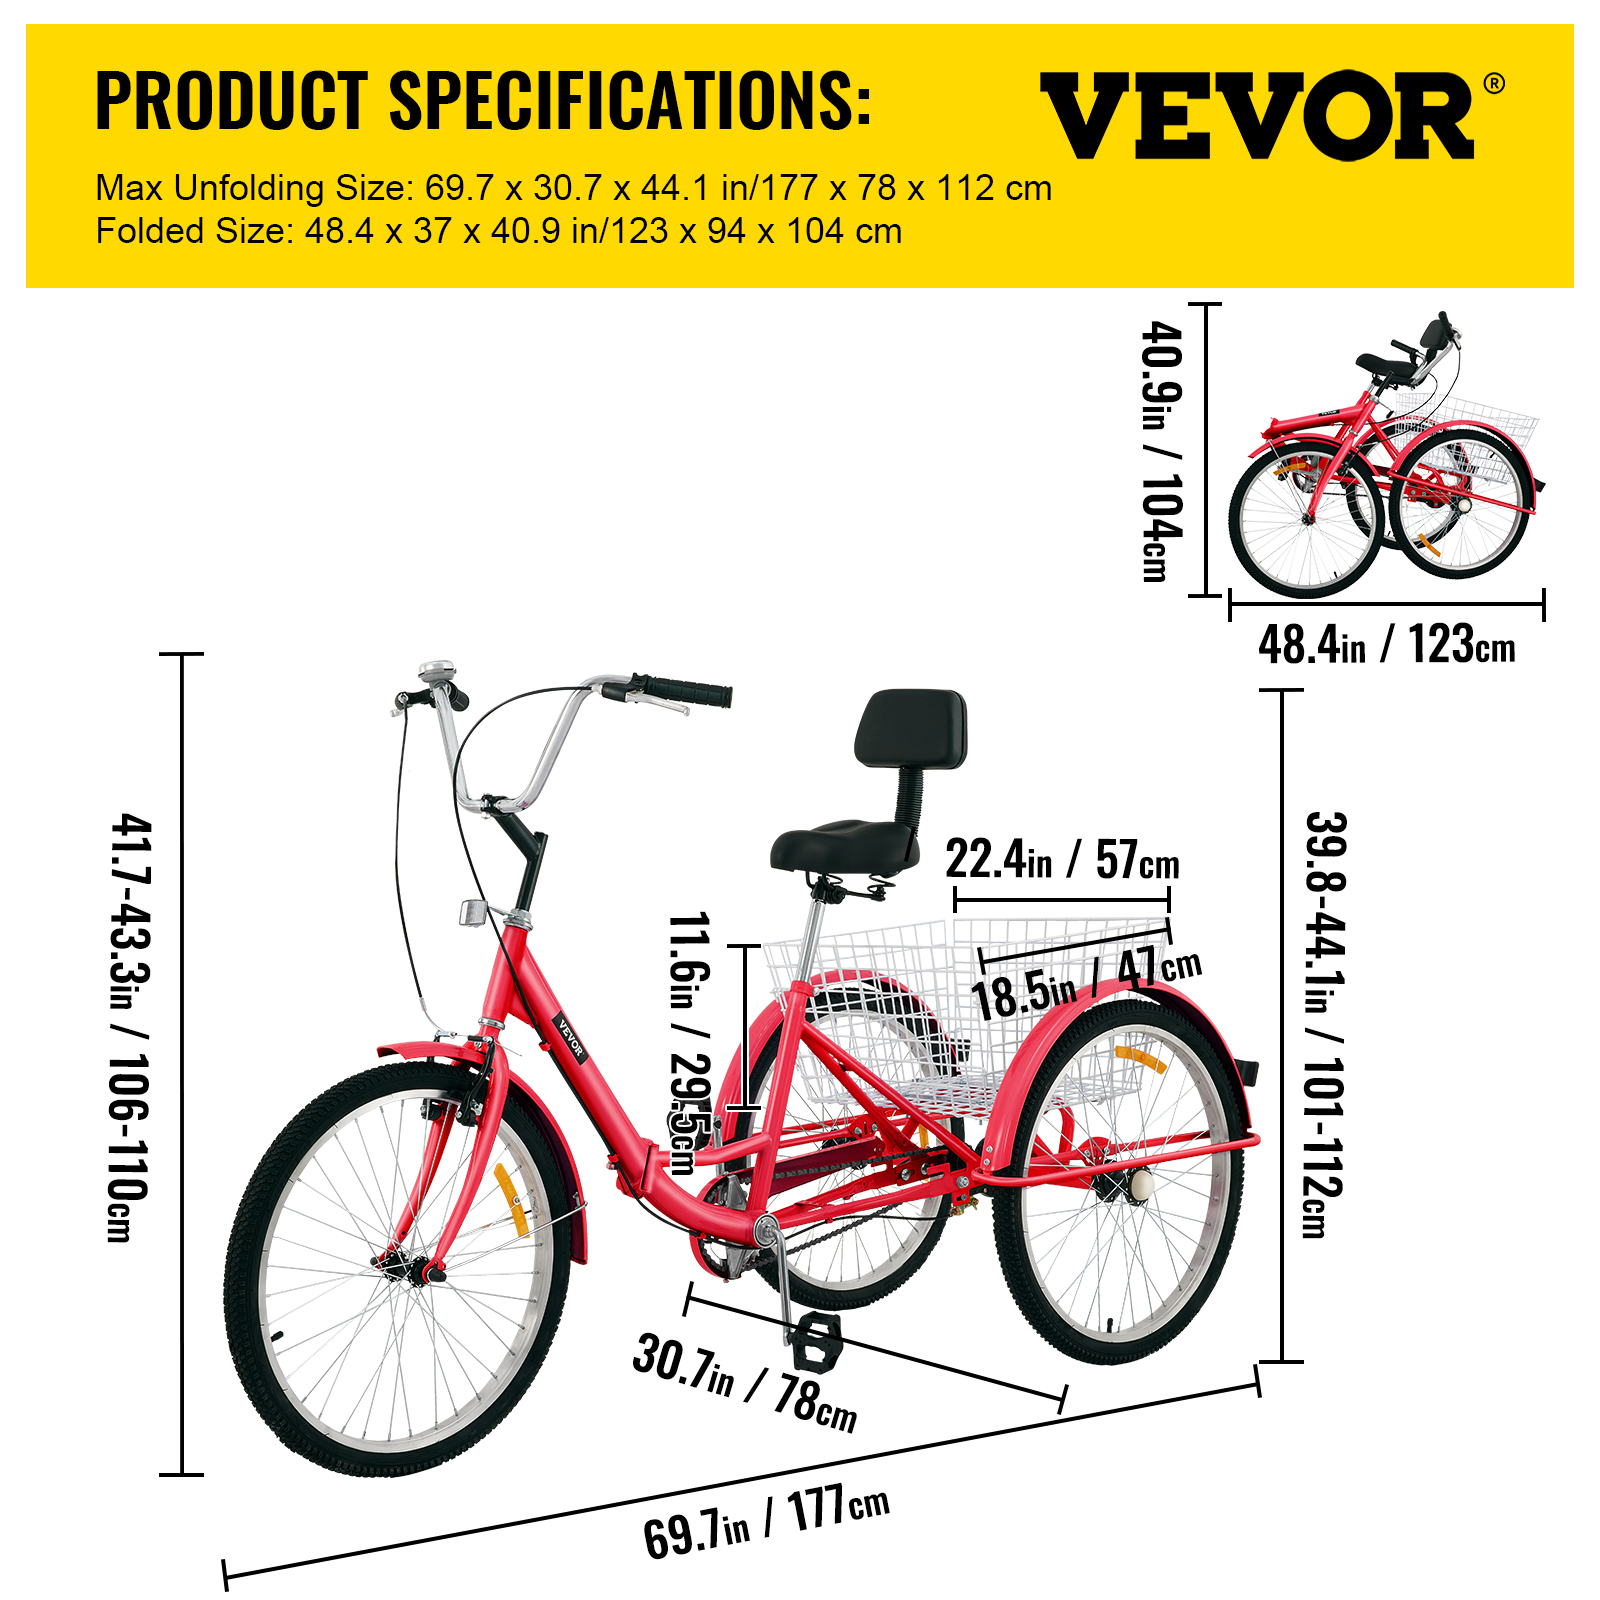 VEVOR Foldable Tricycle 24 inch Wheels,1-Speed Red Trike, 3 Wheels Colorful Bike with Basket, Portable and Foldable Bicycle for Adults Exercise Shopping Picnic Outdoor Activities - image 2 of 9